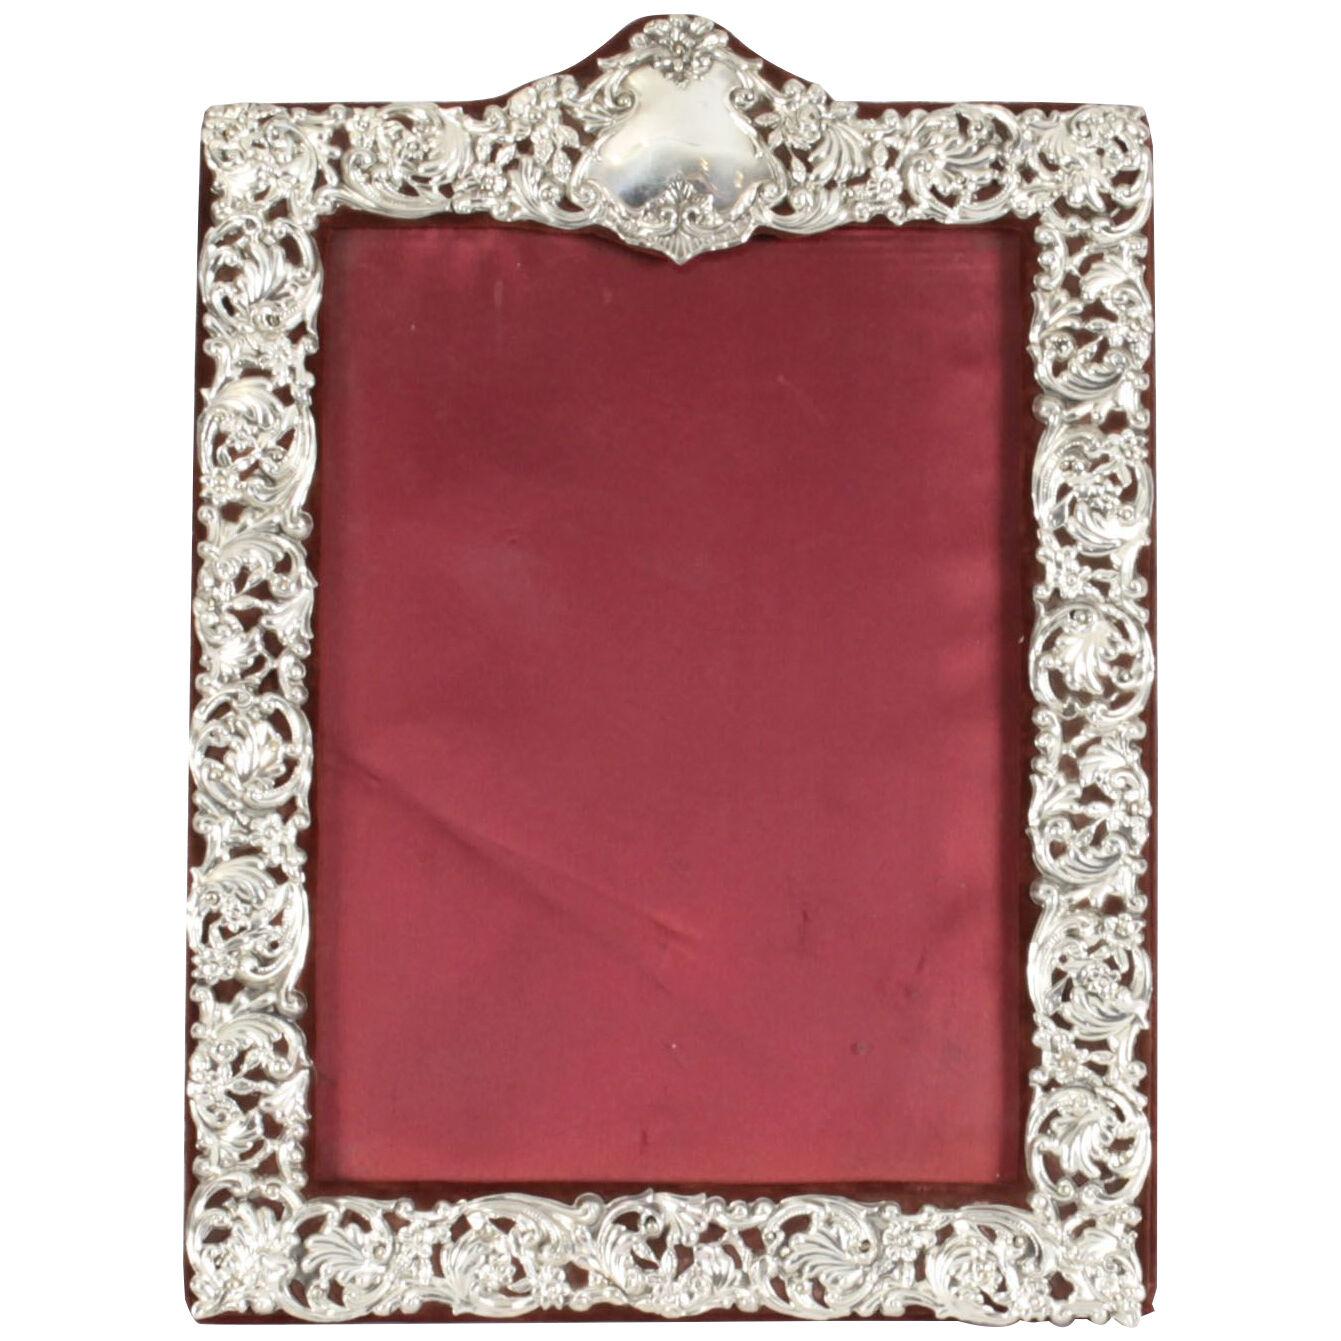 Antique Sterling Silver Photo Frame by Henry Manton 1899 19th C 28x21cm